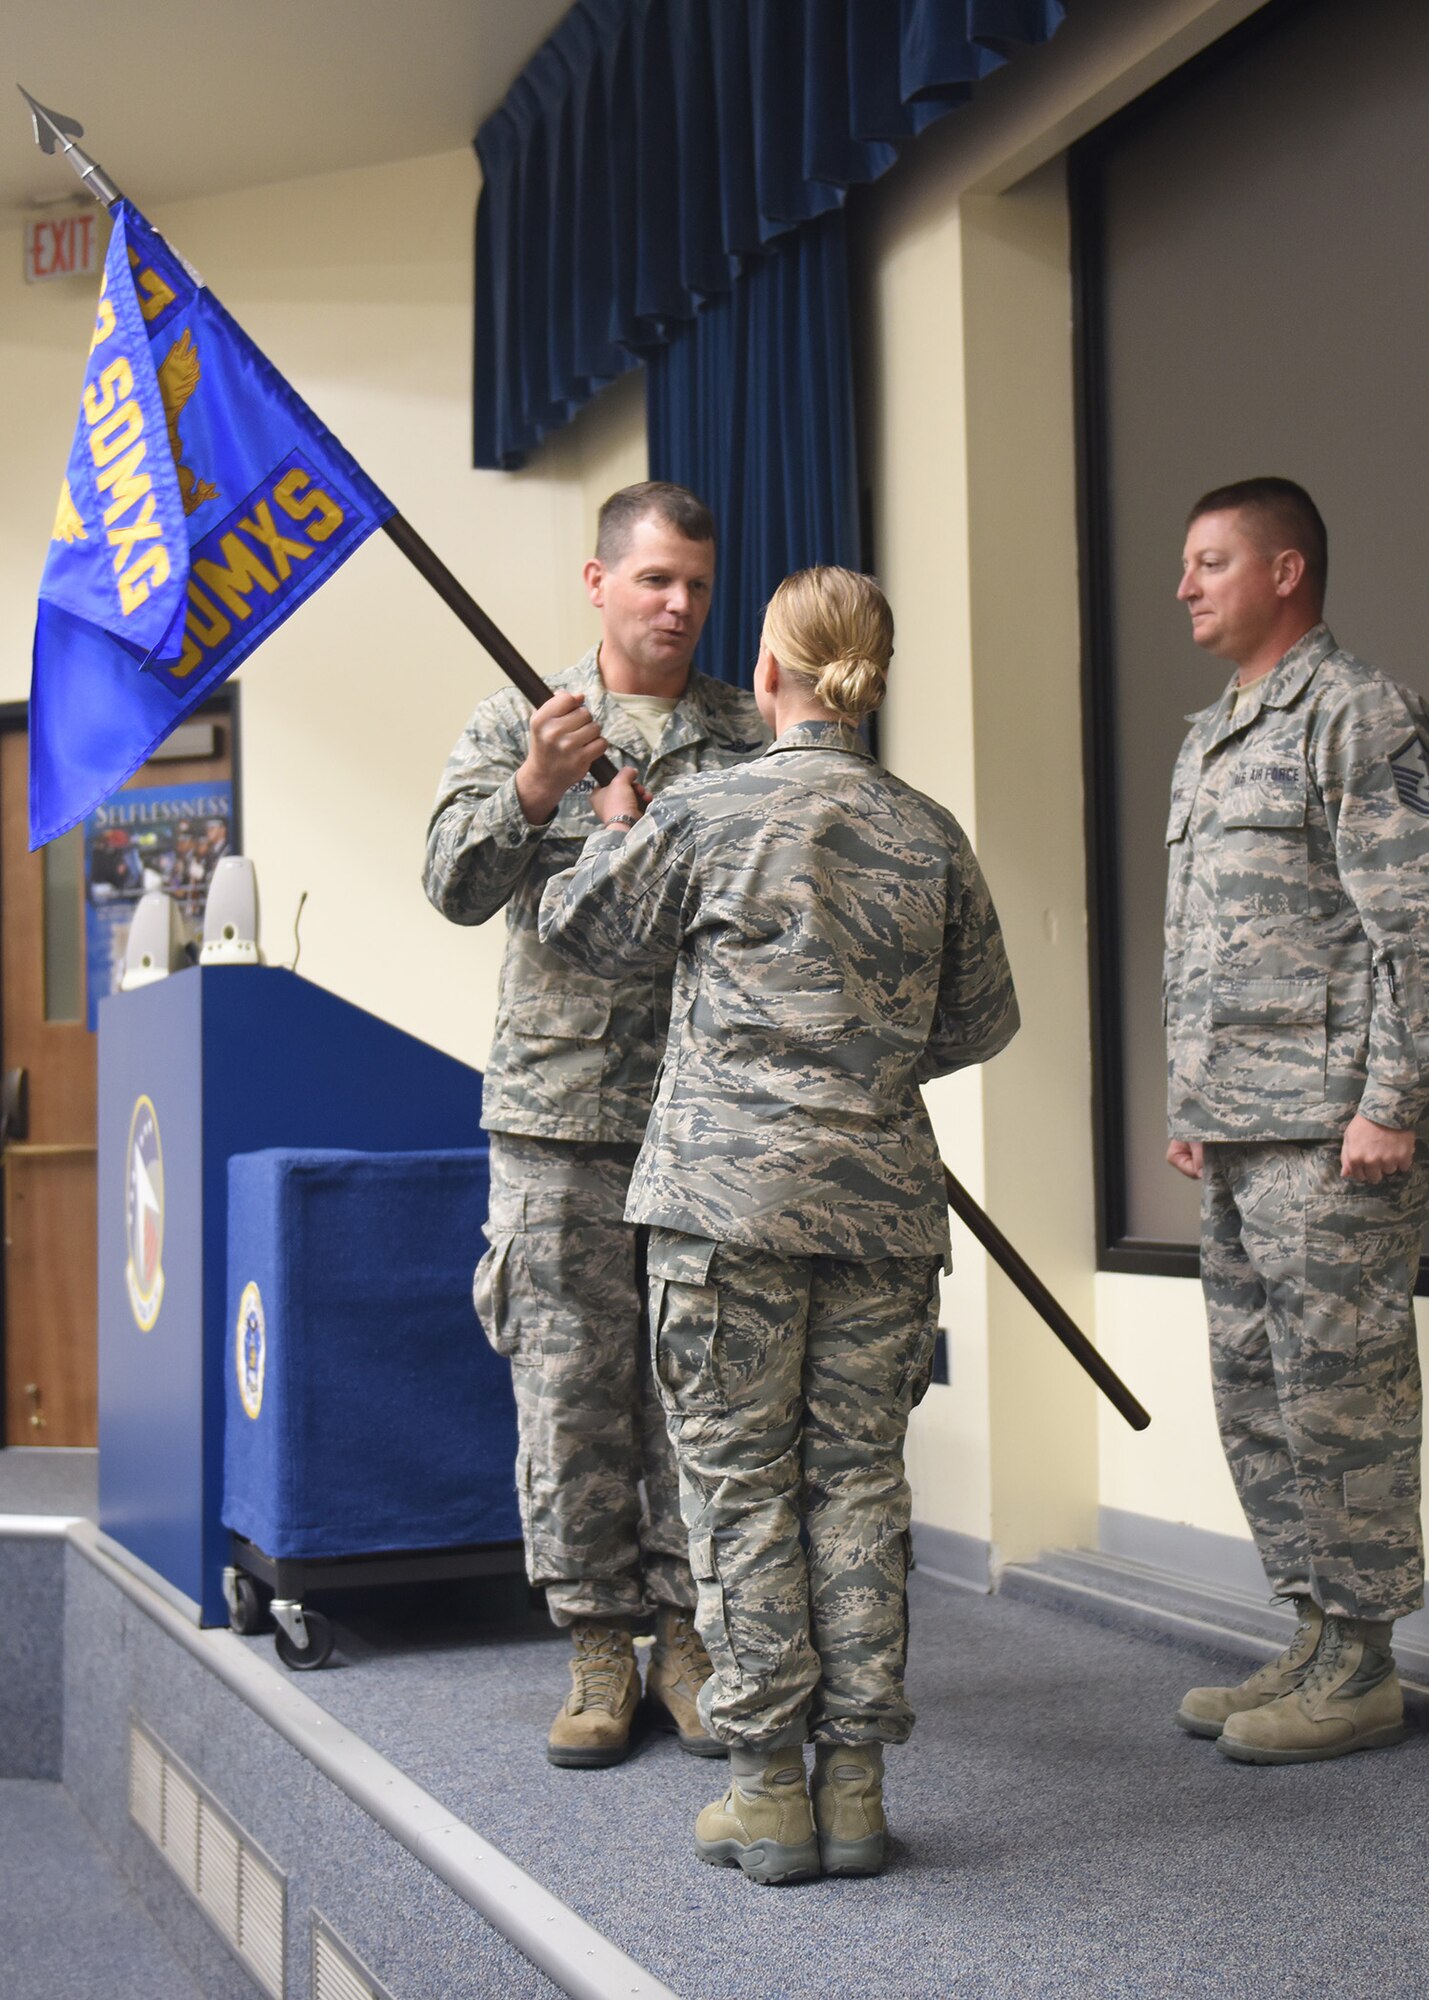 Col. Michael Watson, former 193rd Special Operations Maintenance Squadron commander, presents the guidon to Lt. Col. Amy Crossley, 193rd Special Operations Maintenance Squadron commander, during a change-of-command ceremony June 11 at Middletown, Pennsylvania. Crossley is the first female maintenance squadron commander at the 193rd SOW. The ceremony began with preliminary honors and ended with the symbolic passing of the guidon, representing a new chapter for the wing. (U.S. Air National Guard photo by Airman 1st Class Julia Sorber/Released)